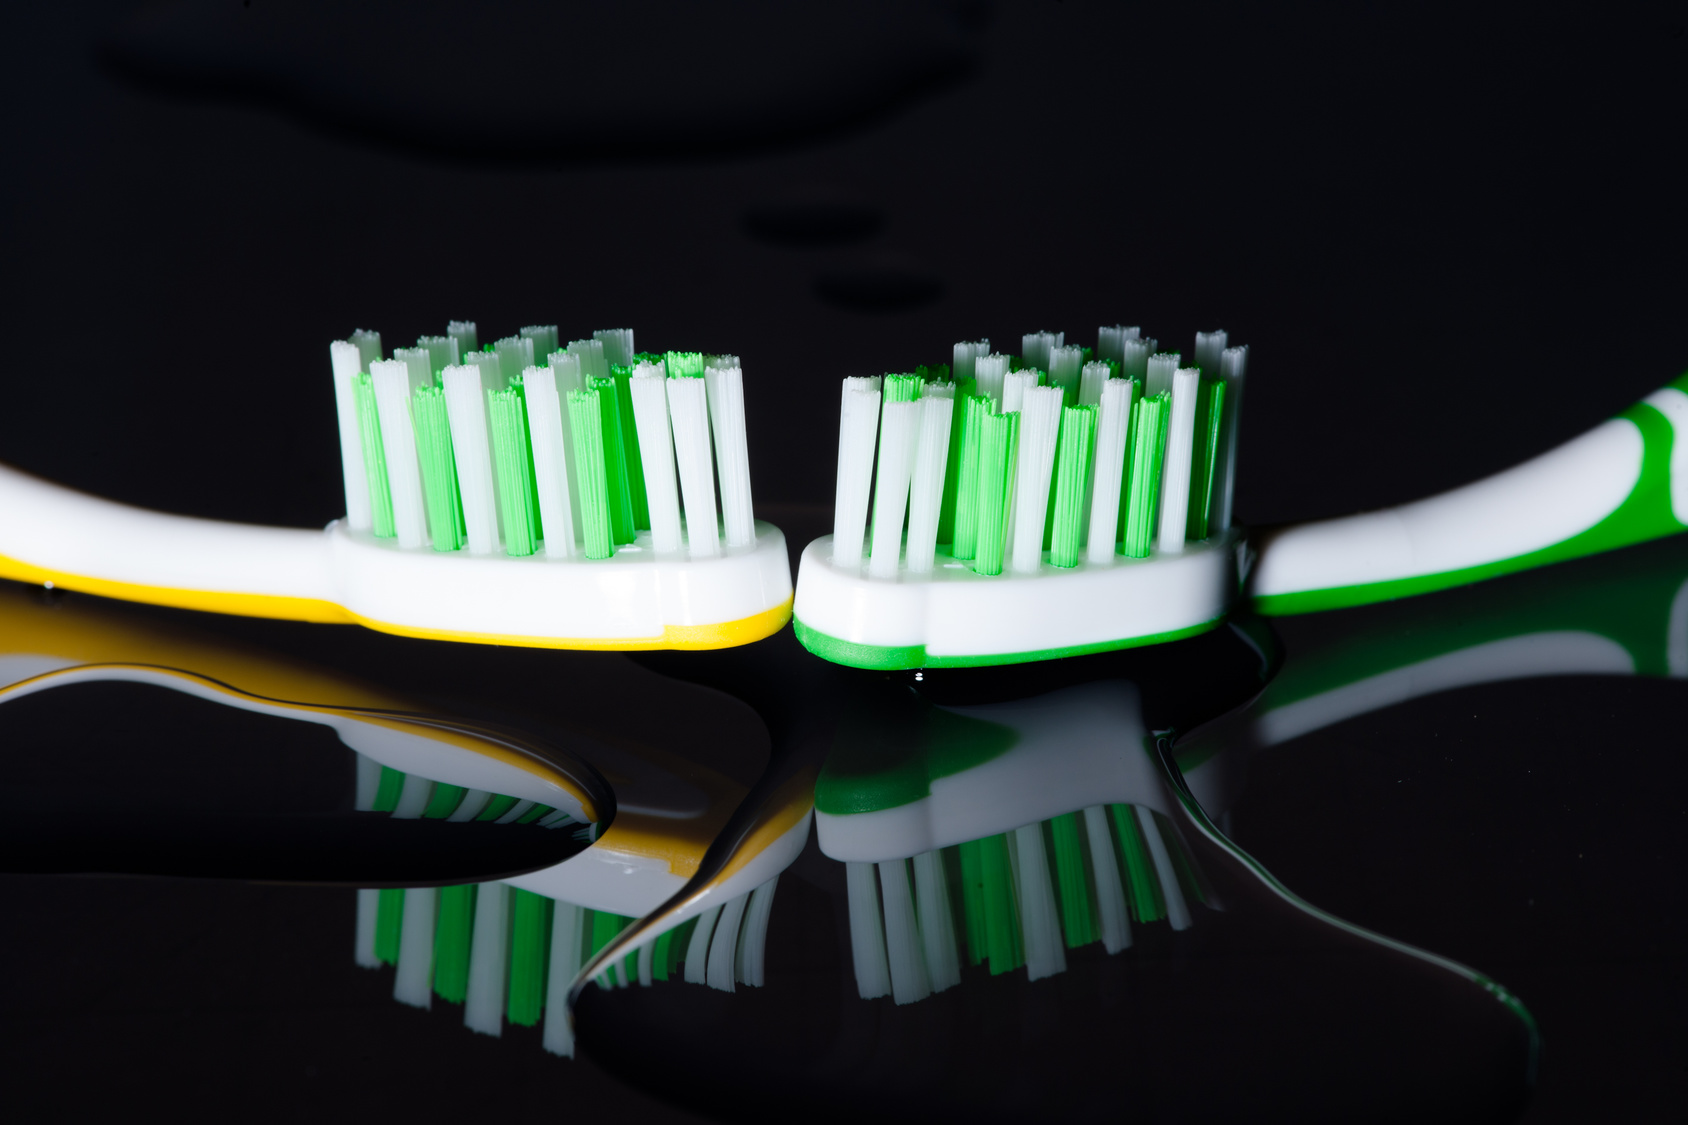 What are ionic toothbrushes, and how do they work?